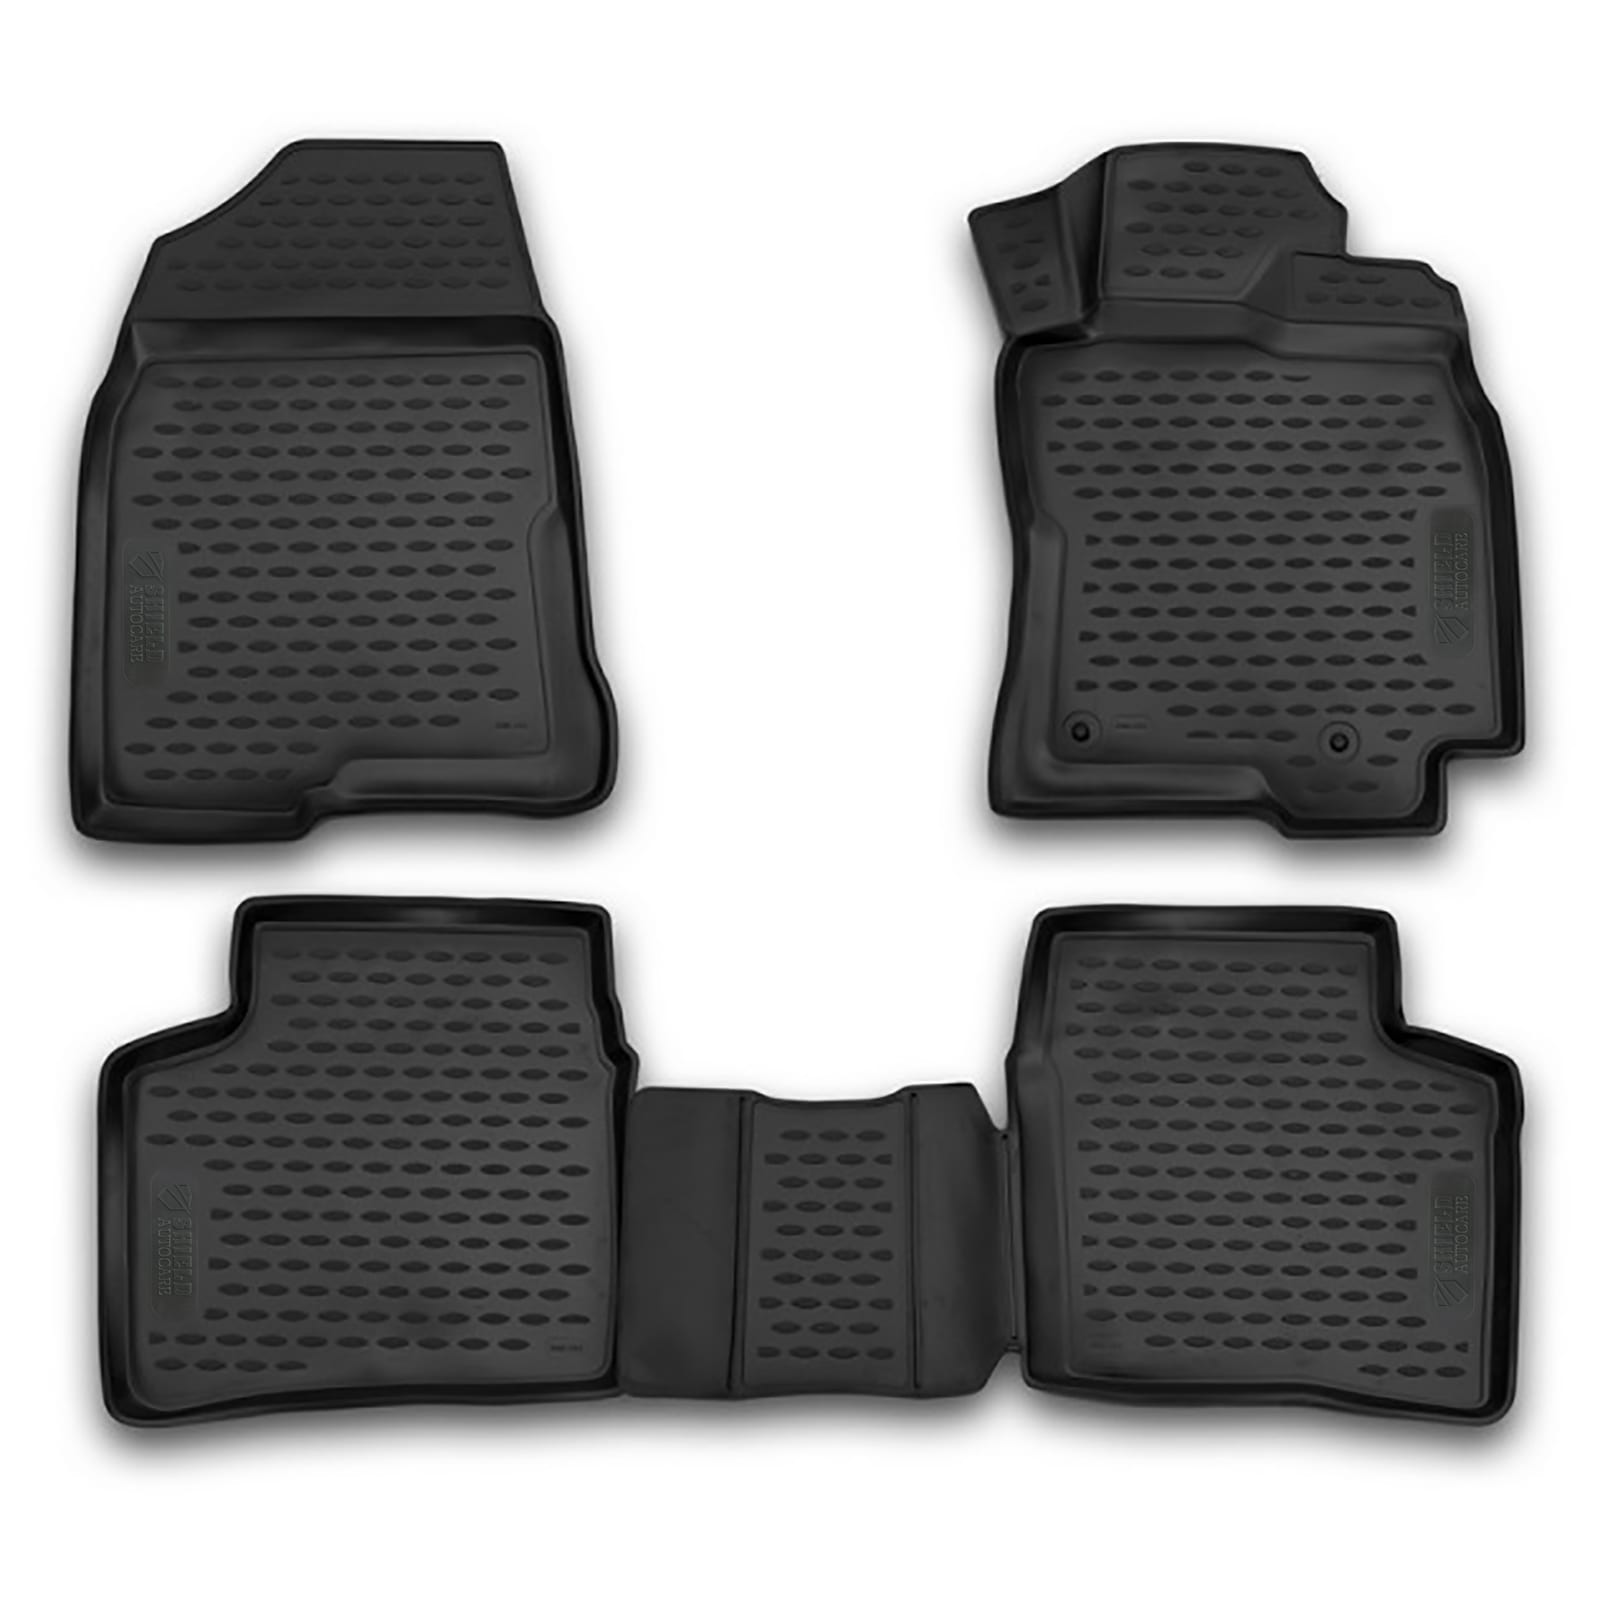 3D Rubber Tray Floor Mats Care Tailored | for Auto Prius Toyota Shield 03-09